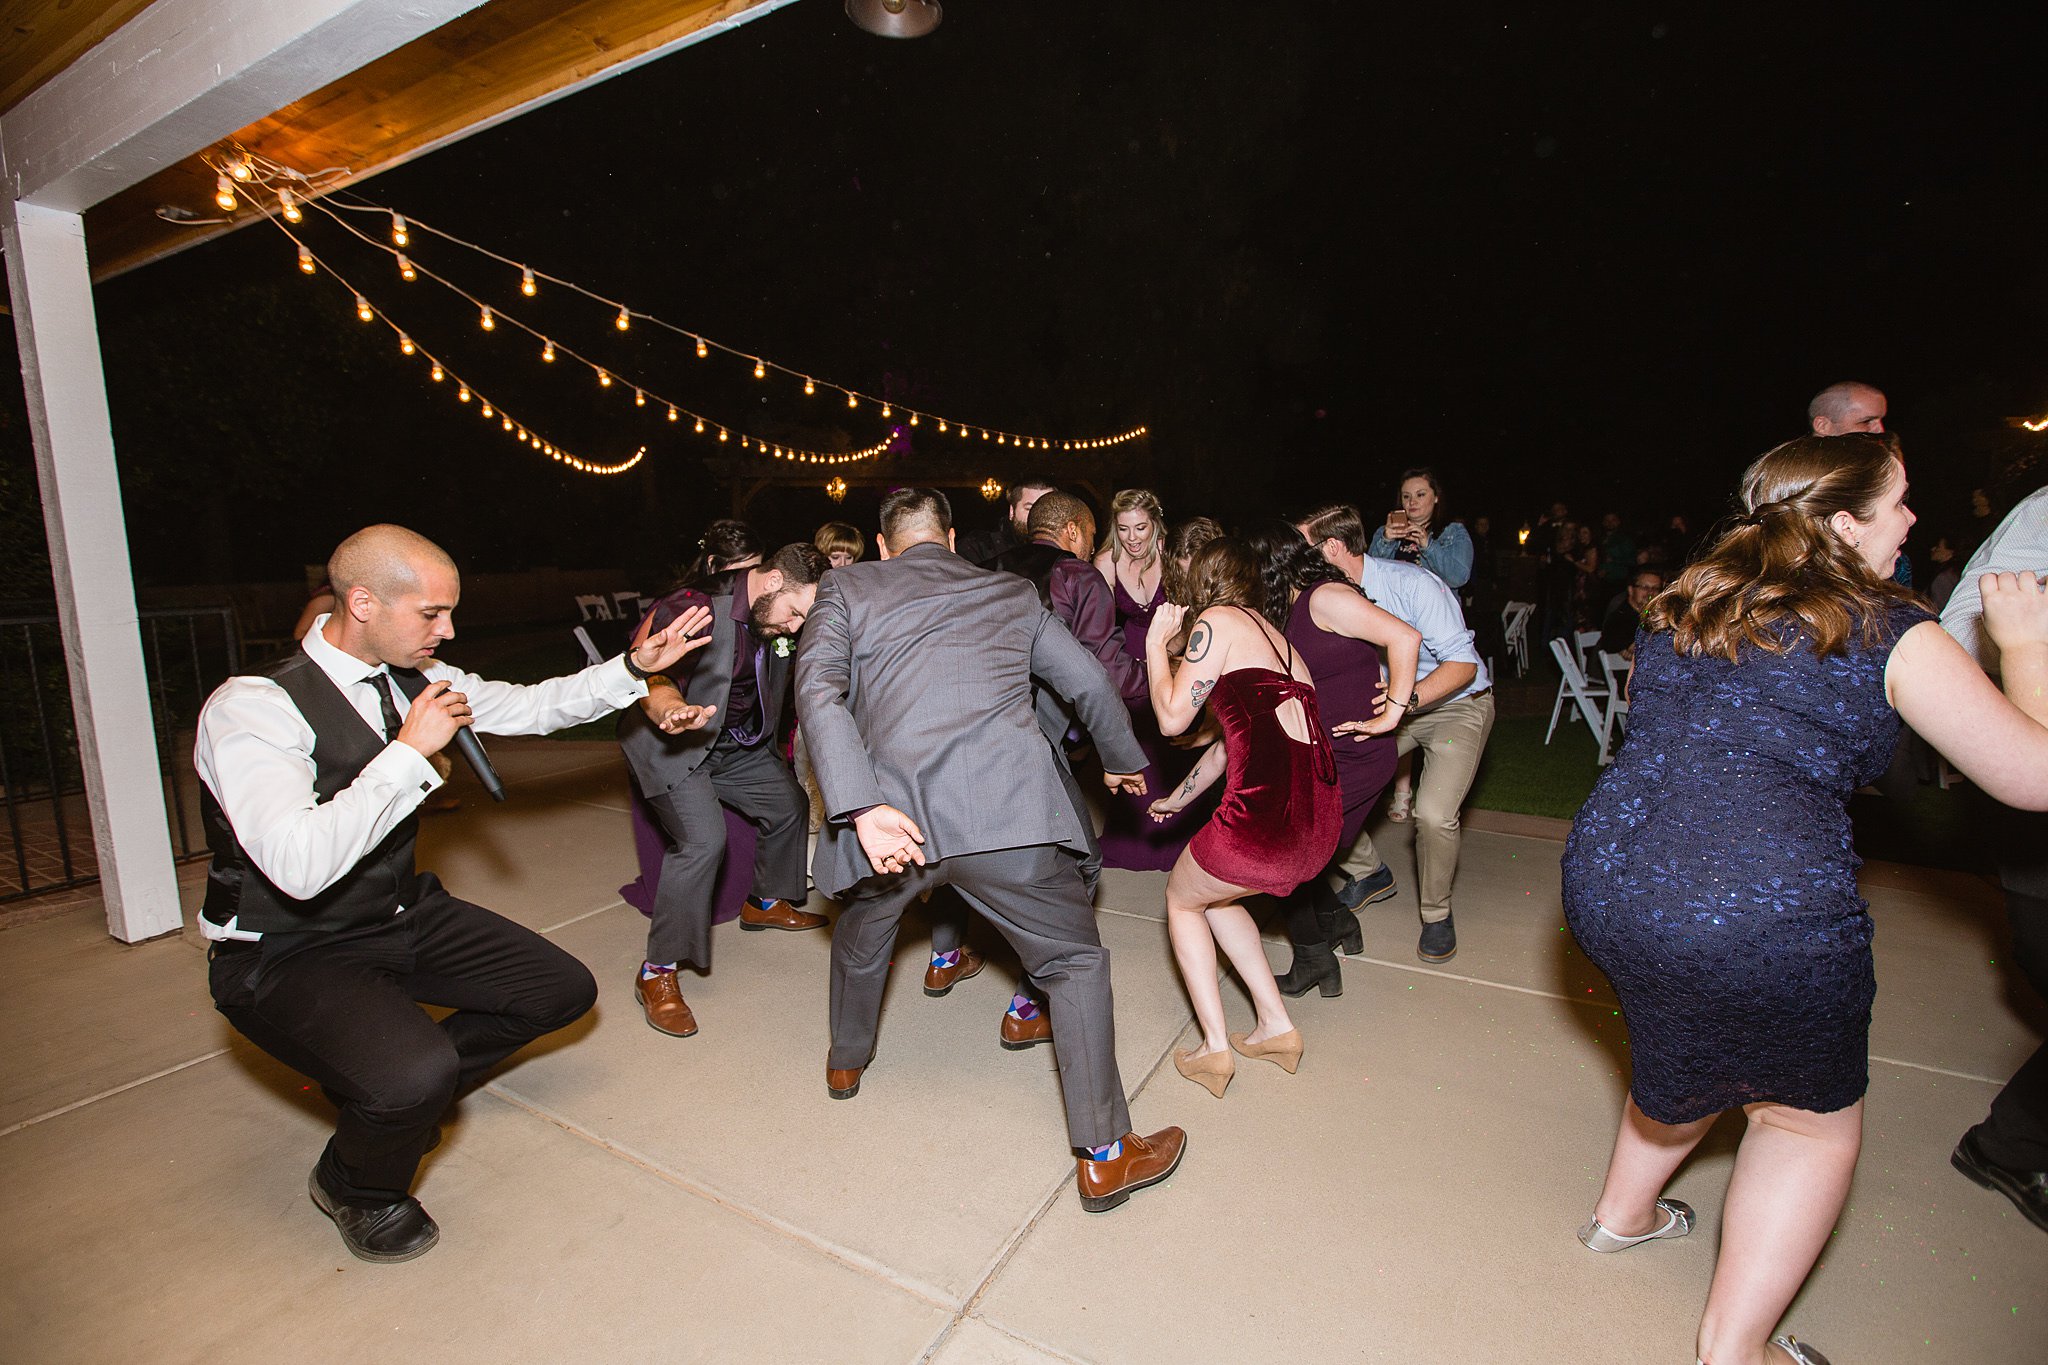 RJ of East Coast DJs leading the wedding reception guests in a dance at Schnepf Farms Farmhouse by Arizona wedding photographer PMA Photography.